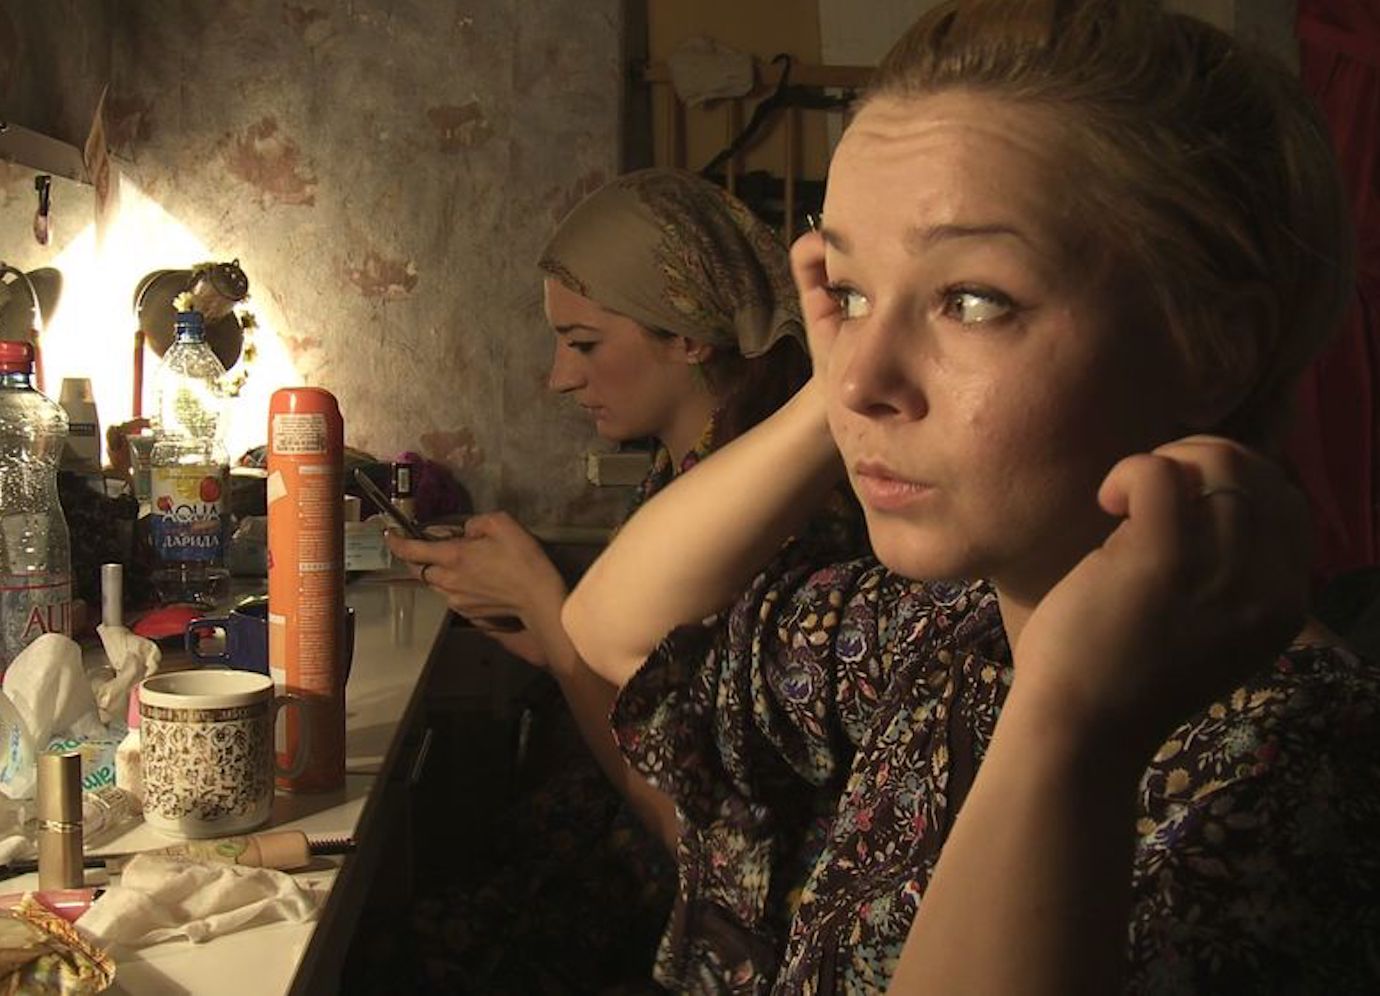 Join a free live screening for a documentary on the Belarus Free Theatre